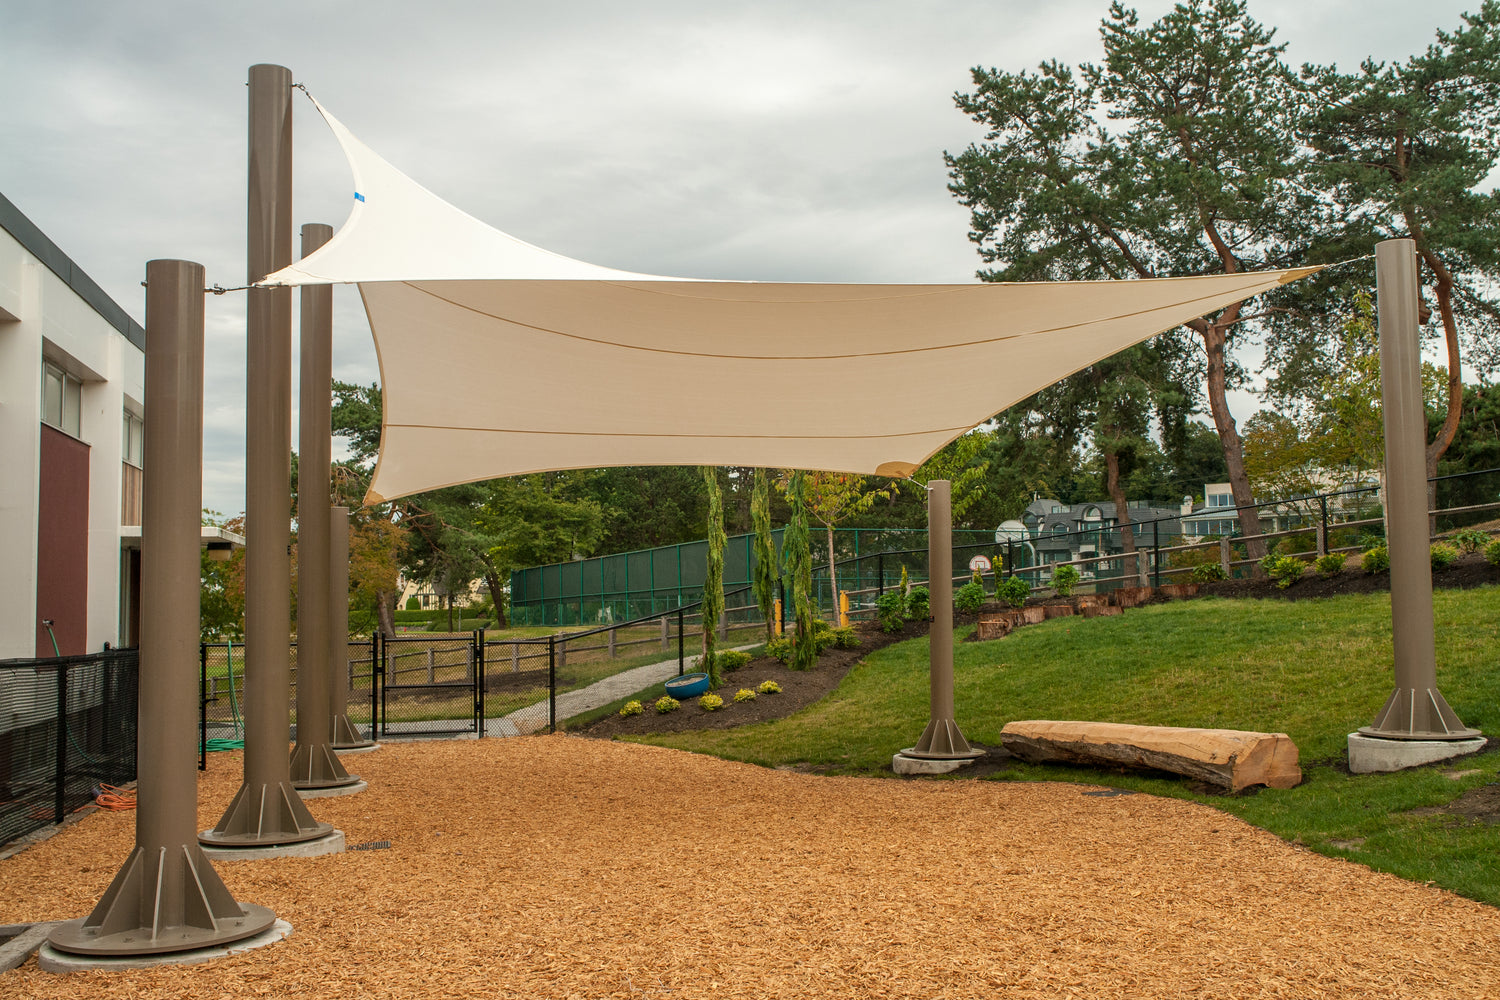 Beige impact canopy set up in a sunny yard, providing shade and a gathering space.